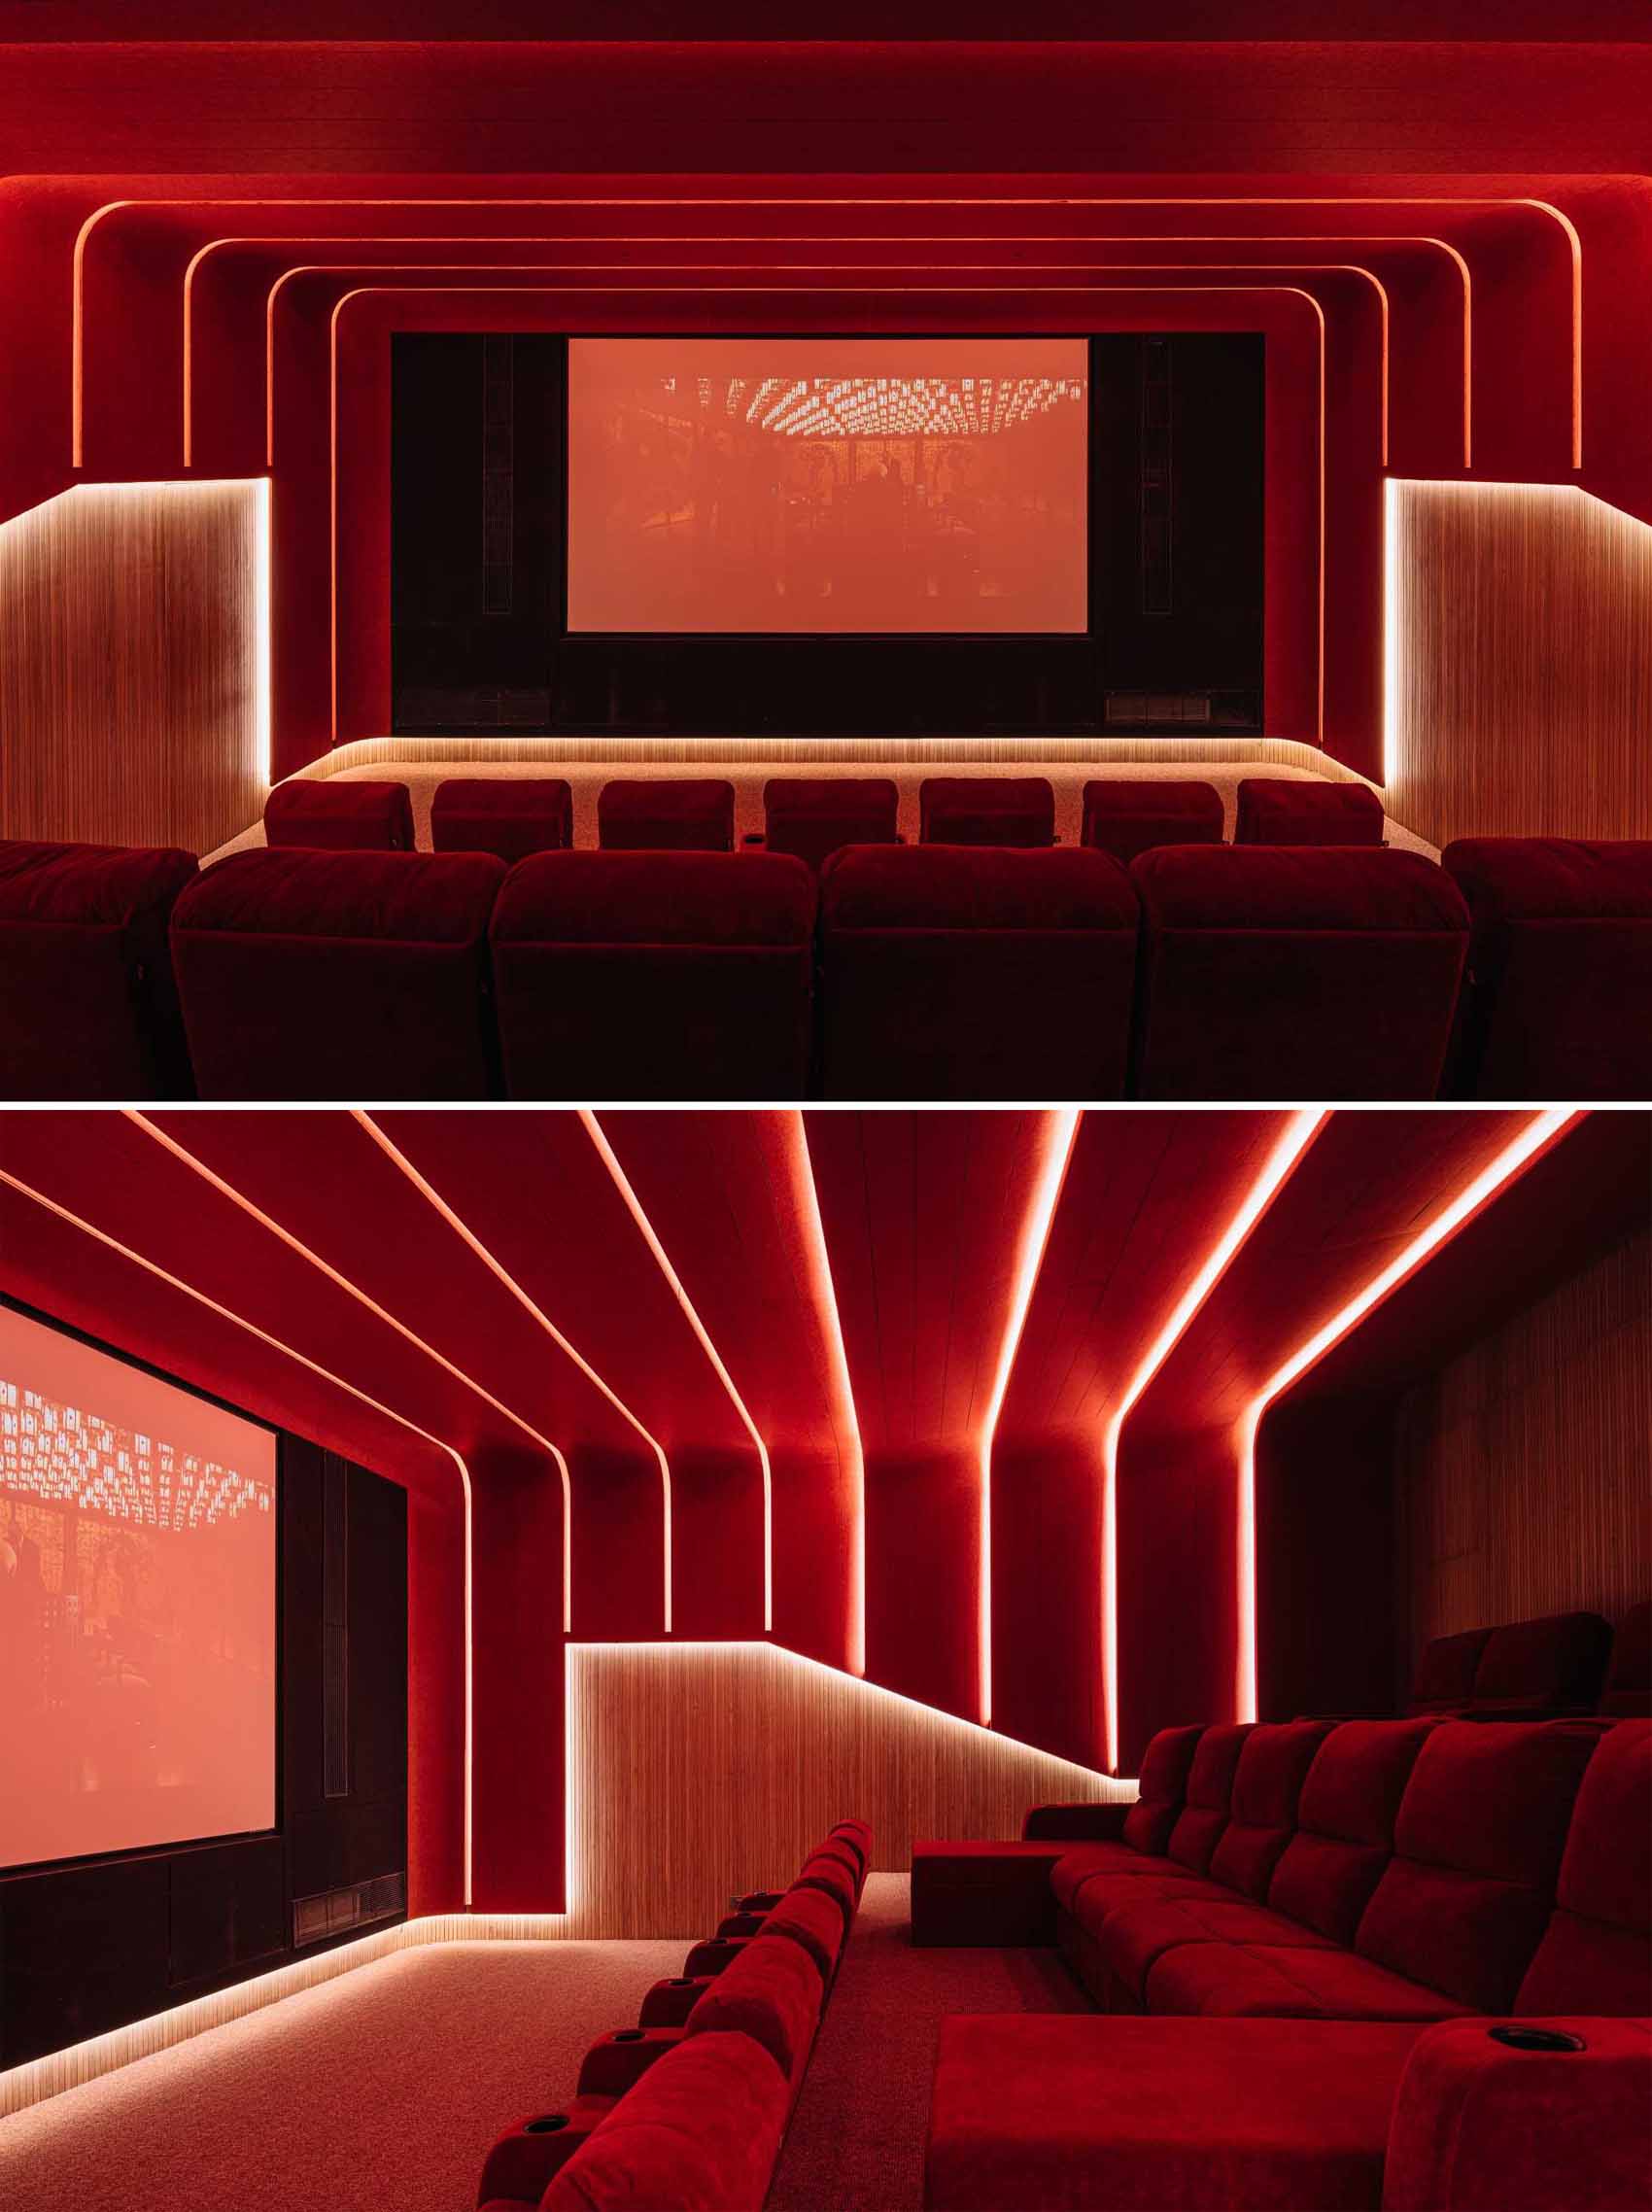 A surprise design element is a home theatre with a red theme.